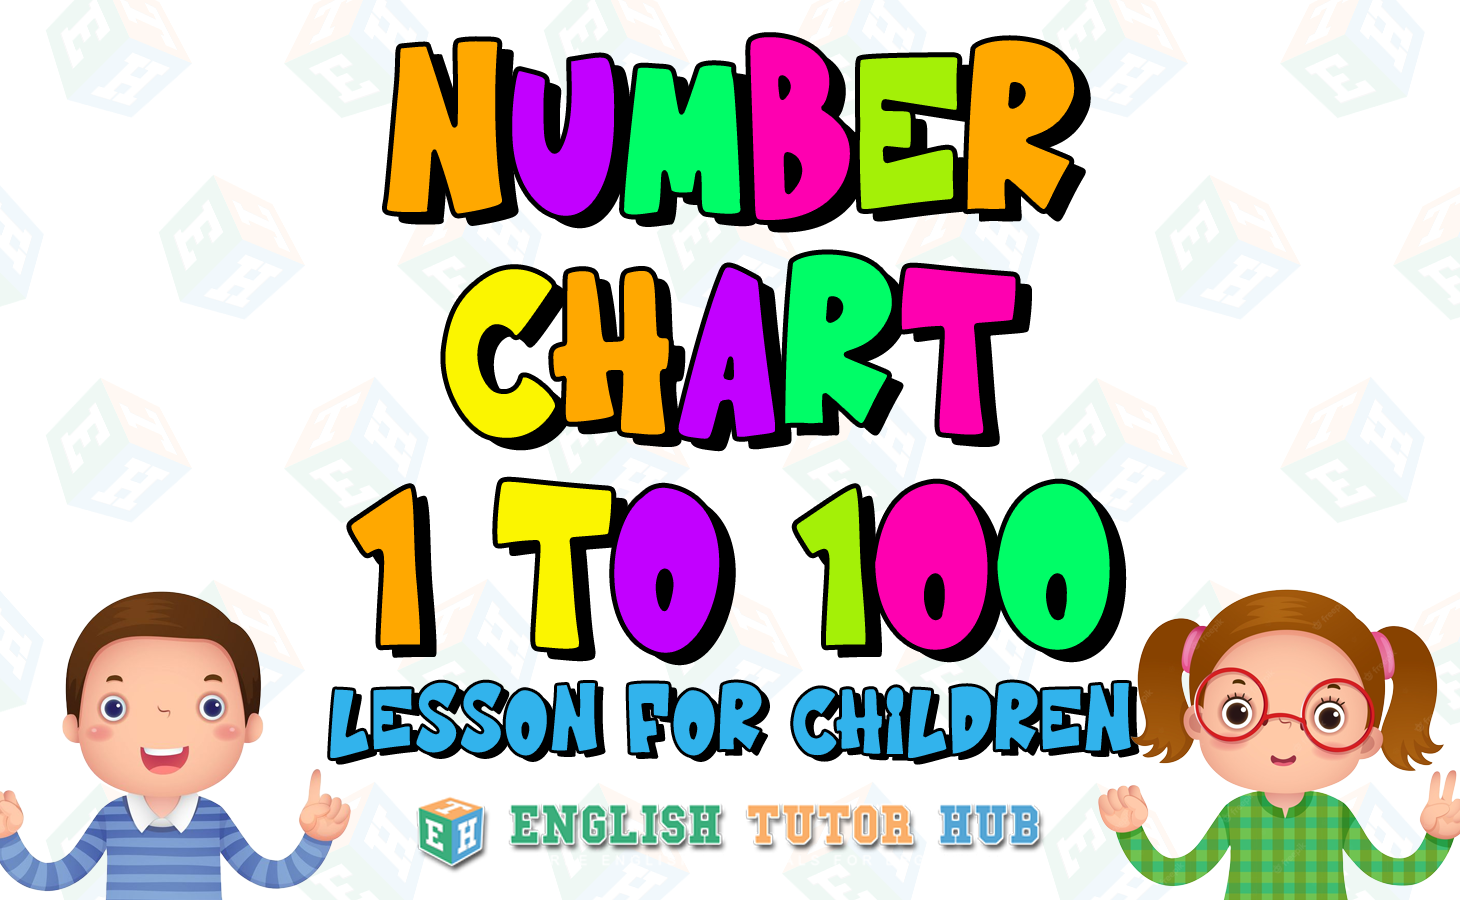 Number Chart 1 to 100 Lesson For Children